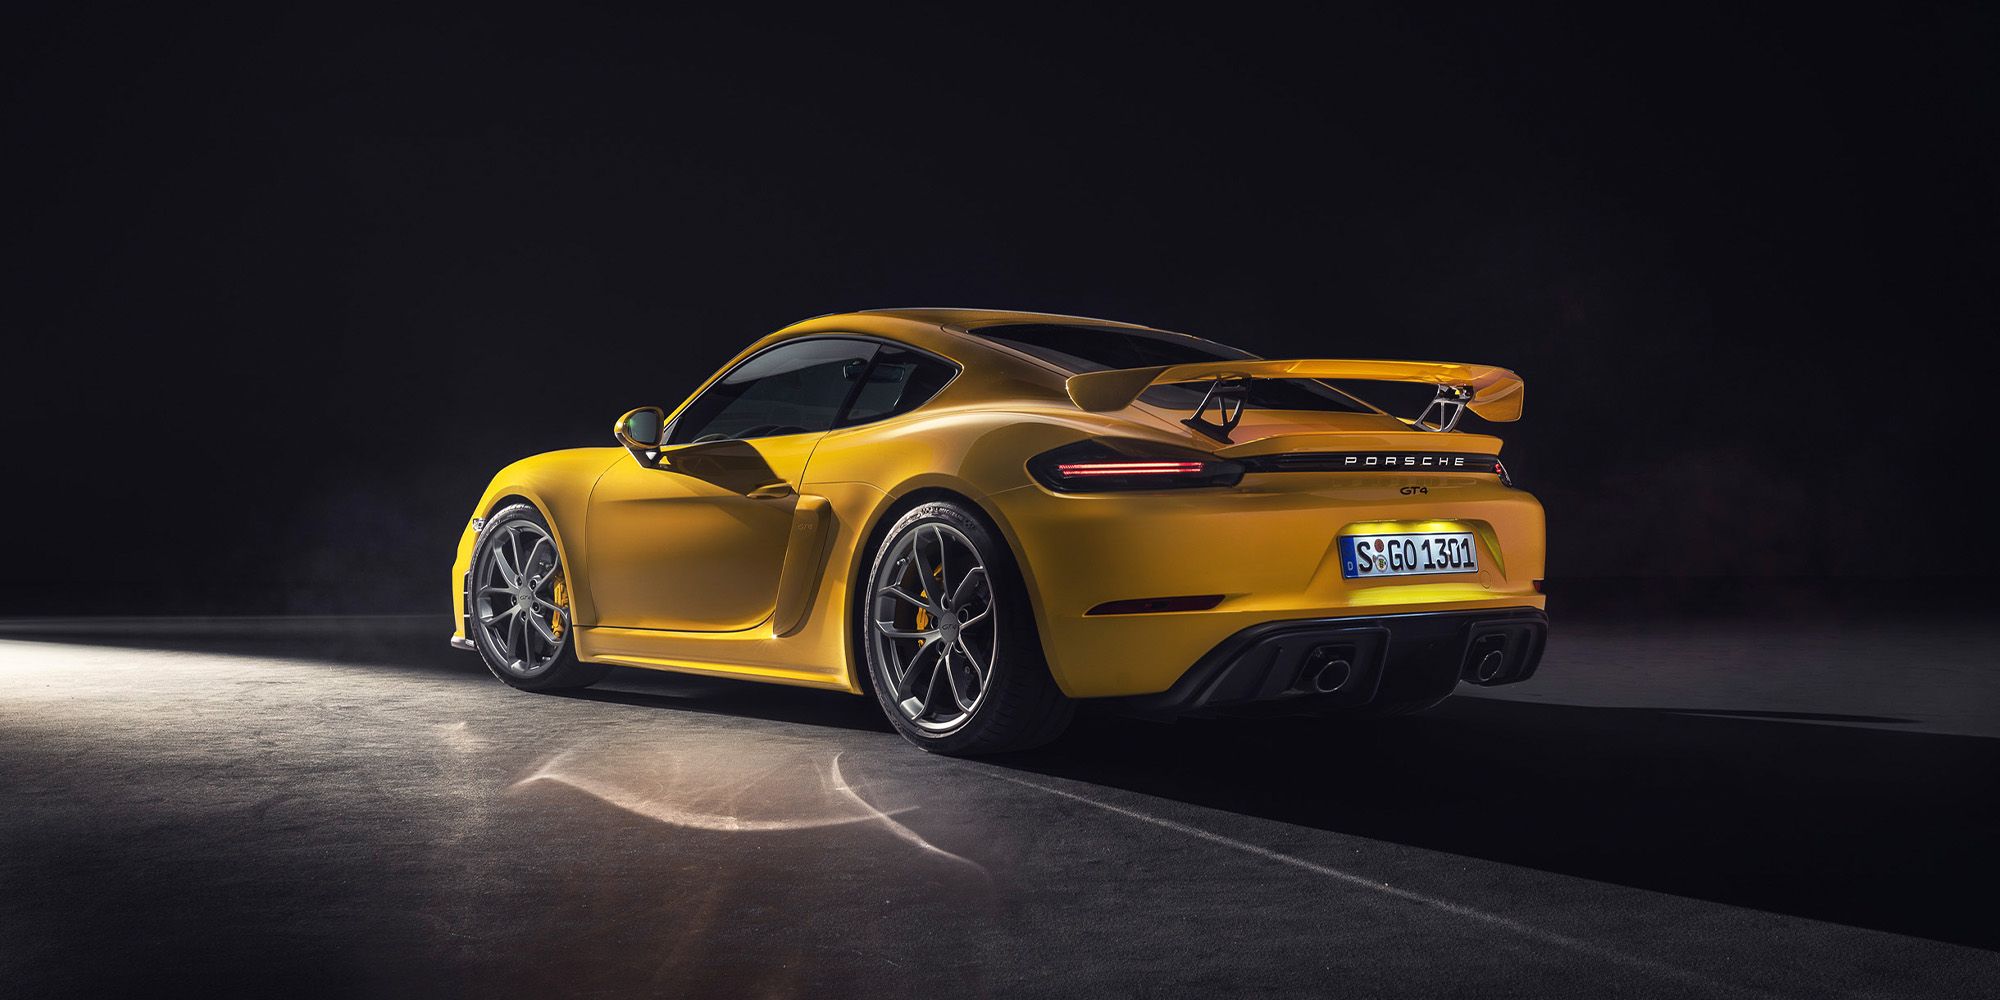 The rear of the 718 Cayman GT4